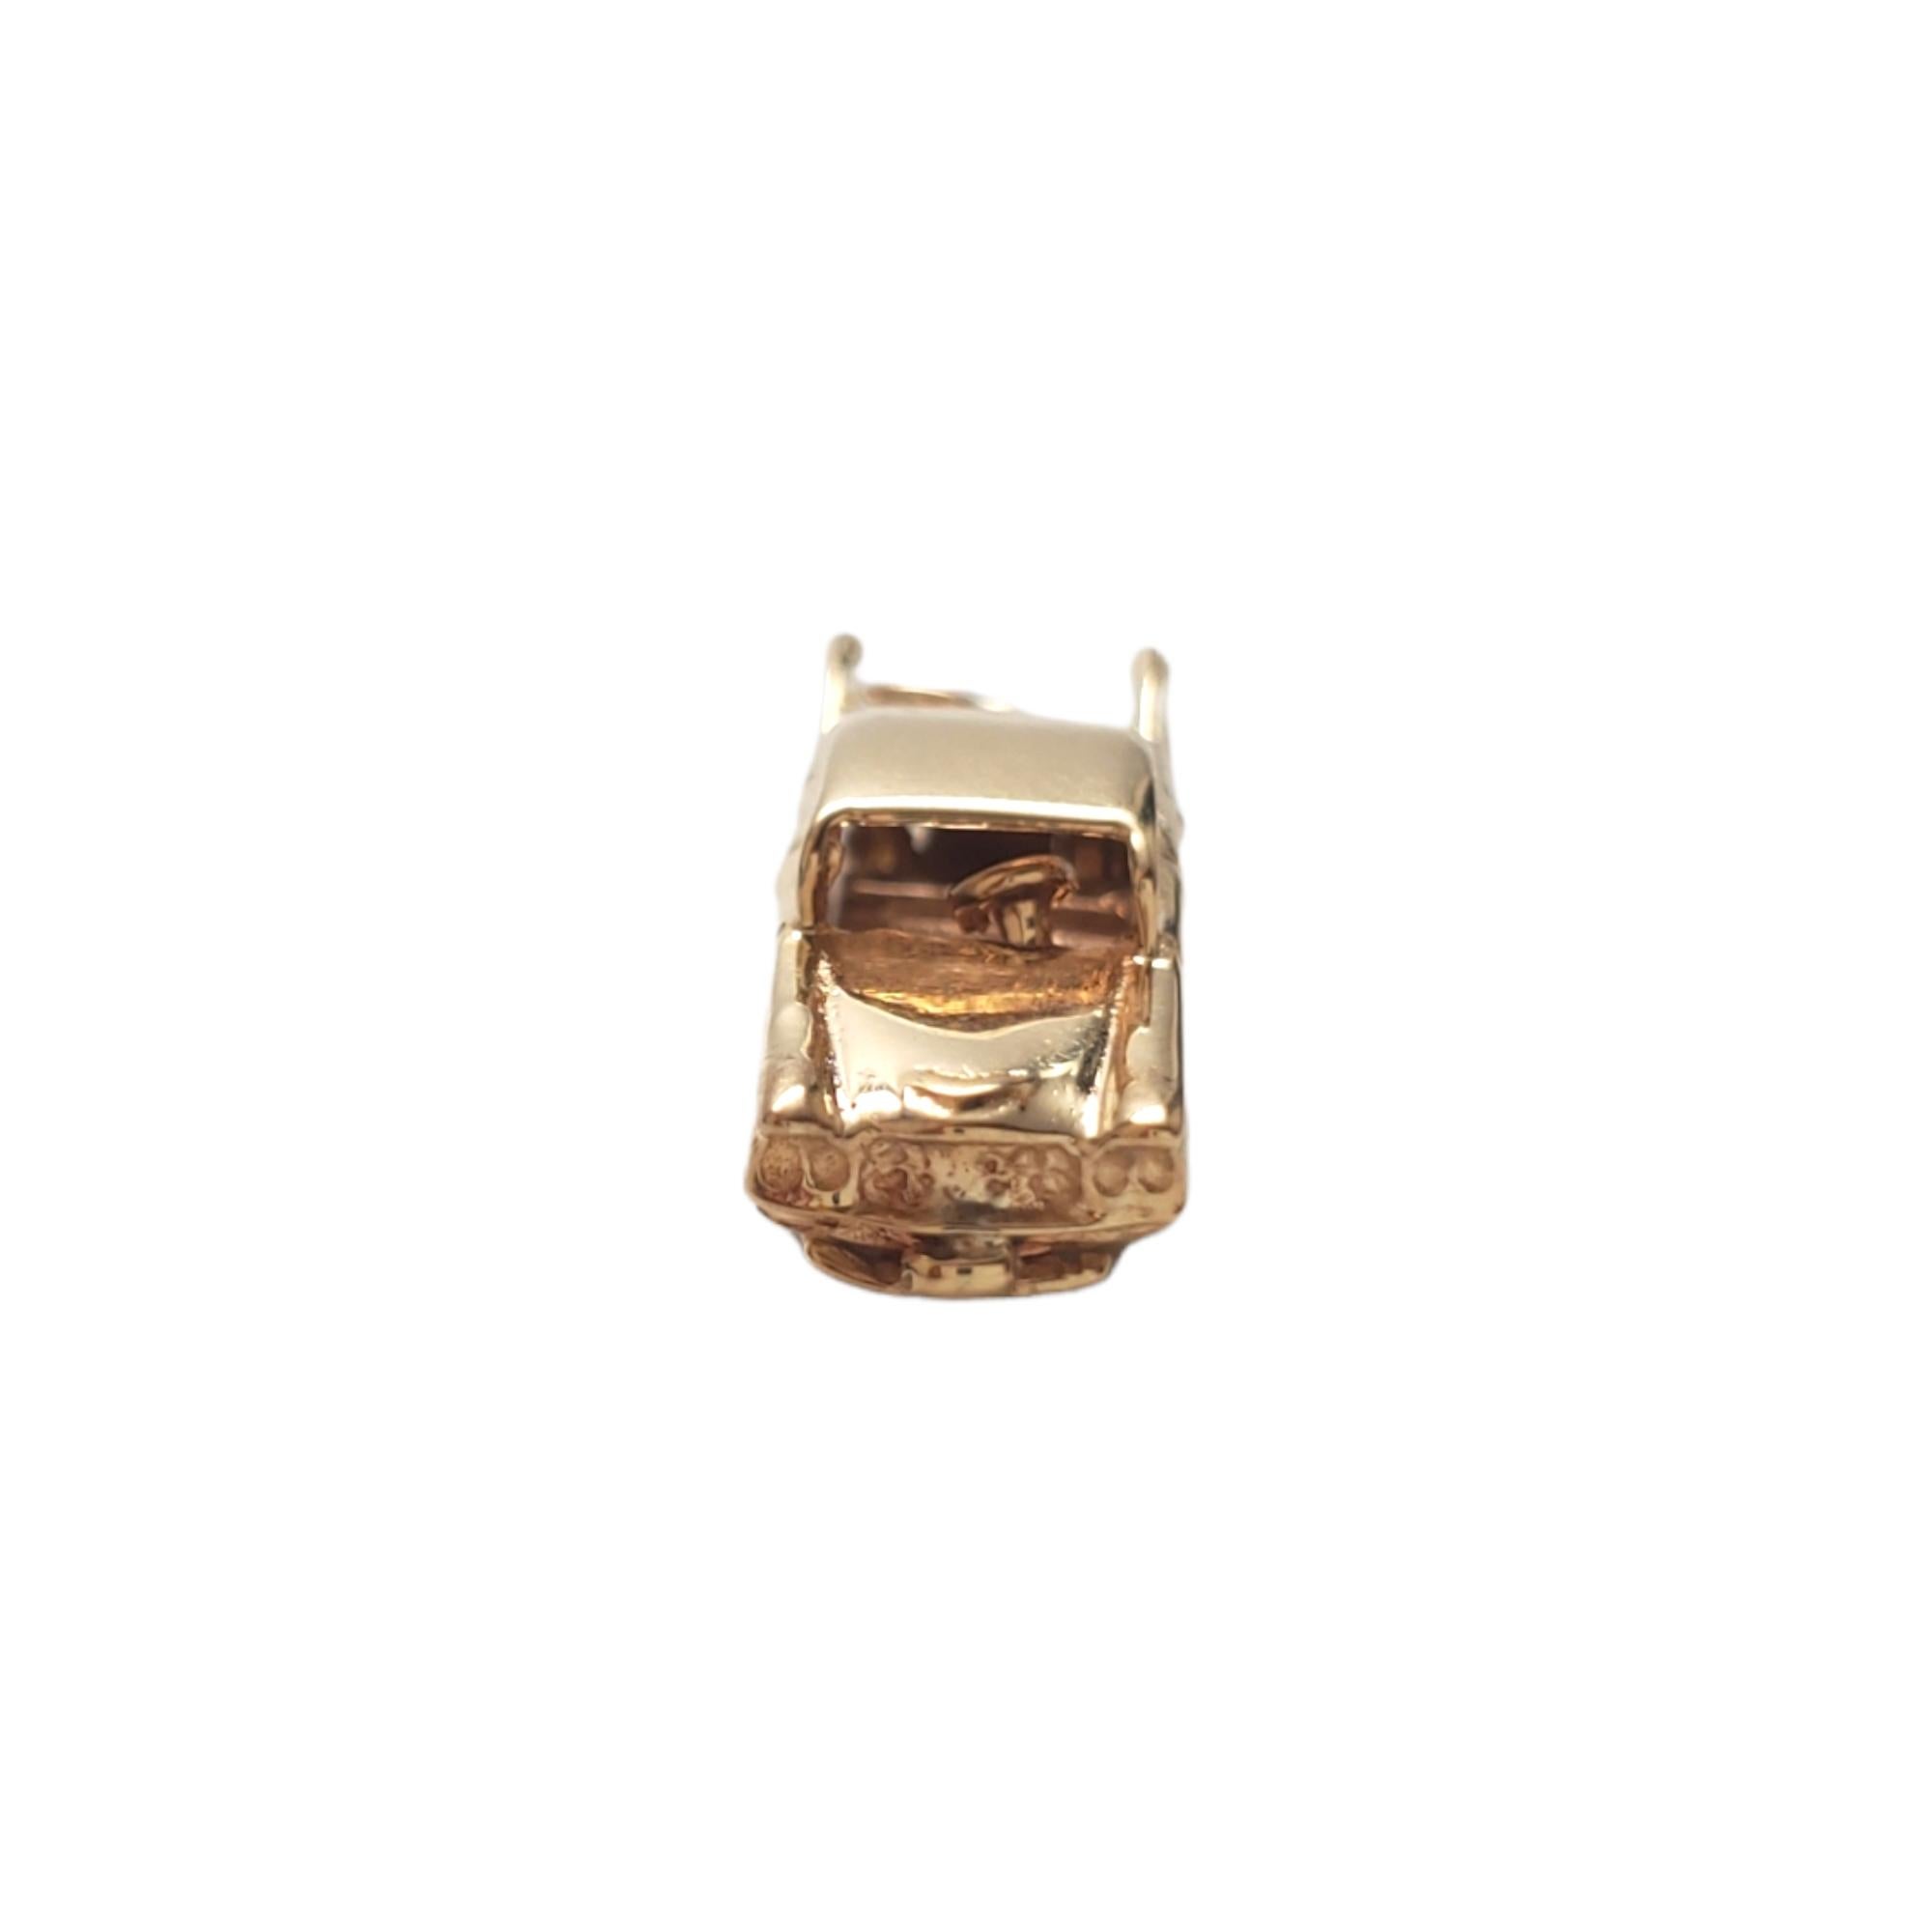 14K Yellow Gold Vintage Car Charm 

This yellow gold car charm will drive its way into your heart! 

Size: 9.59mm X 29.62mm

Weight:  5.7gr / 3.6 dwt

Hallmark: 14K

Very good condition, professionally polished.

Will come packaged in a gift box and